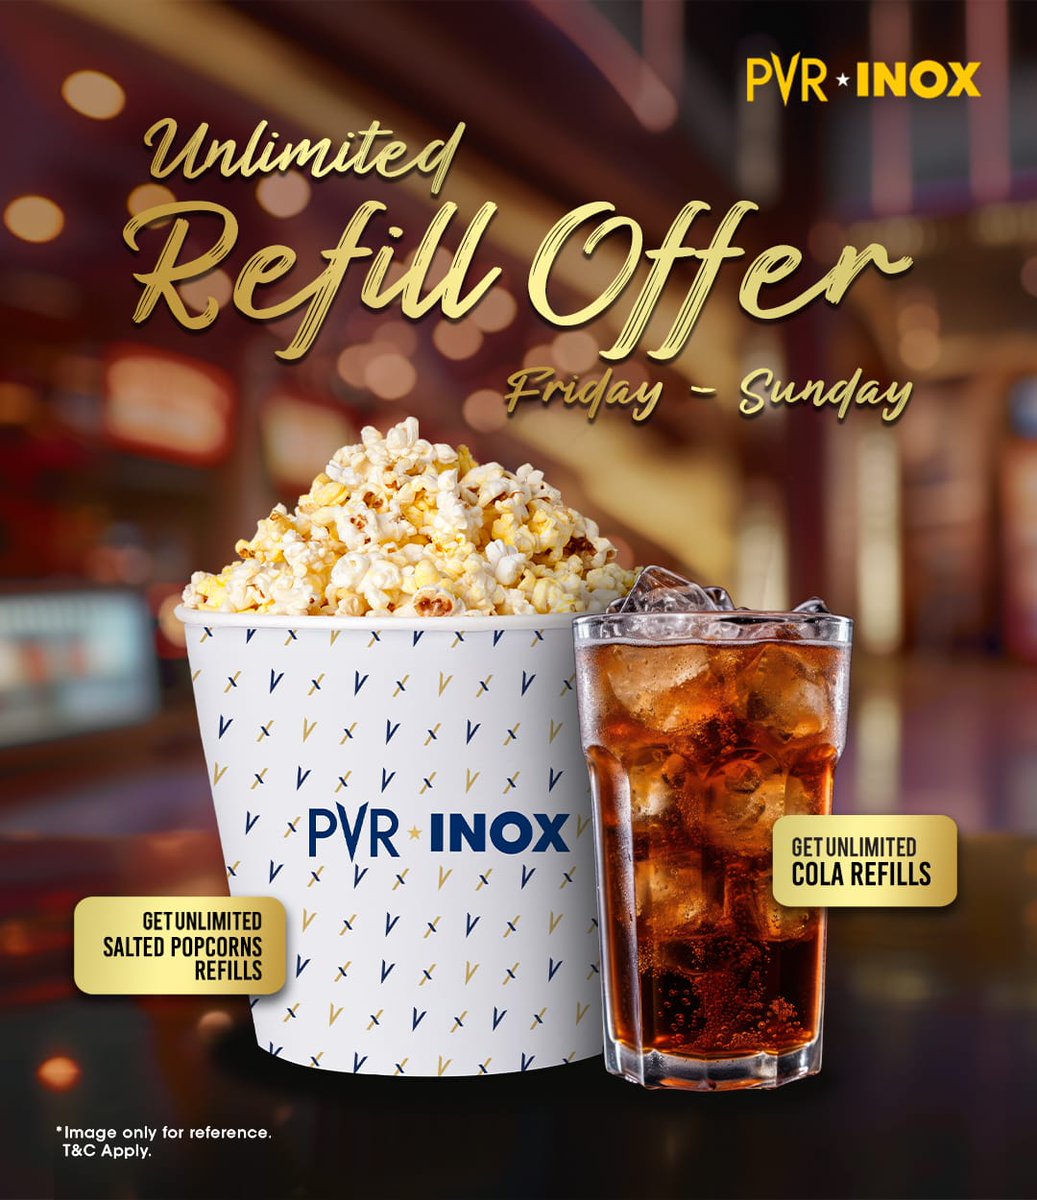 Stay fueled for the ultimate cinematic adventure with our unlimited refill offer from Friday to Sunday. Get unlimited popcorn (240 g) 🍿 and Pepsi refills (810 ml) to keep the excitement going! 🥤🎬
.
.
.
*T&Cs Apply
#UnlimitedRefillOffer #Tasty #Popcorn #Pepsi #UnlimitedRefills